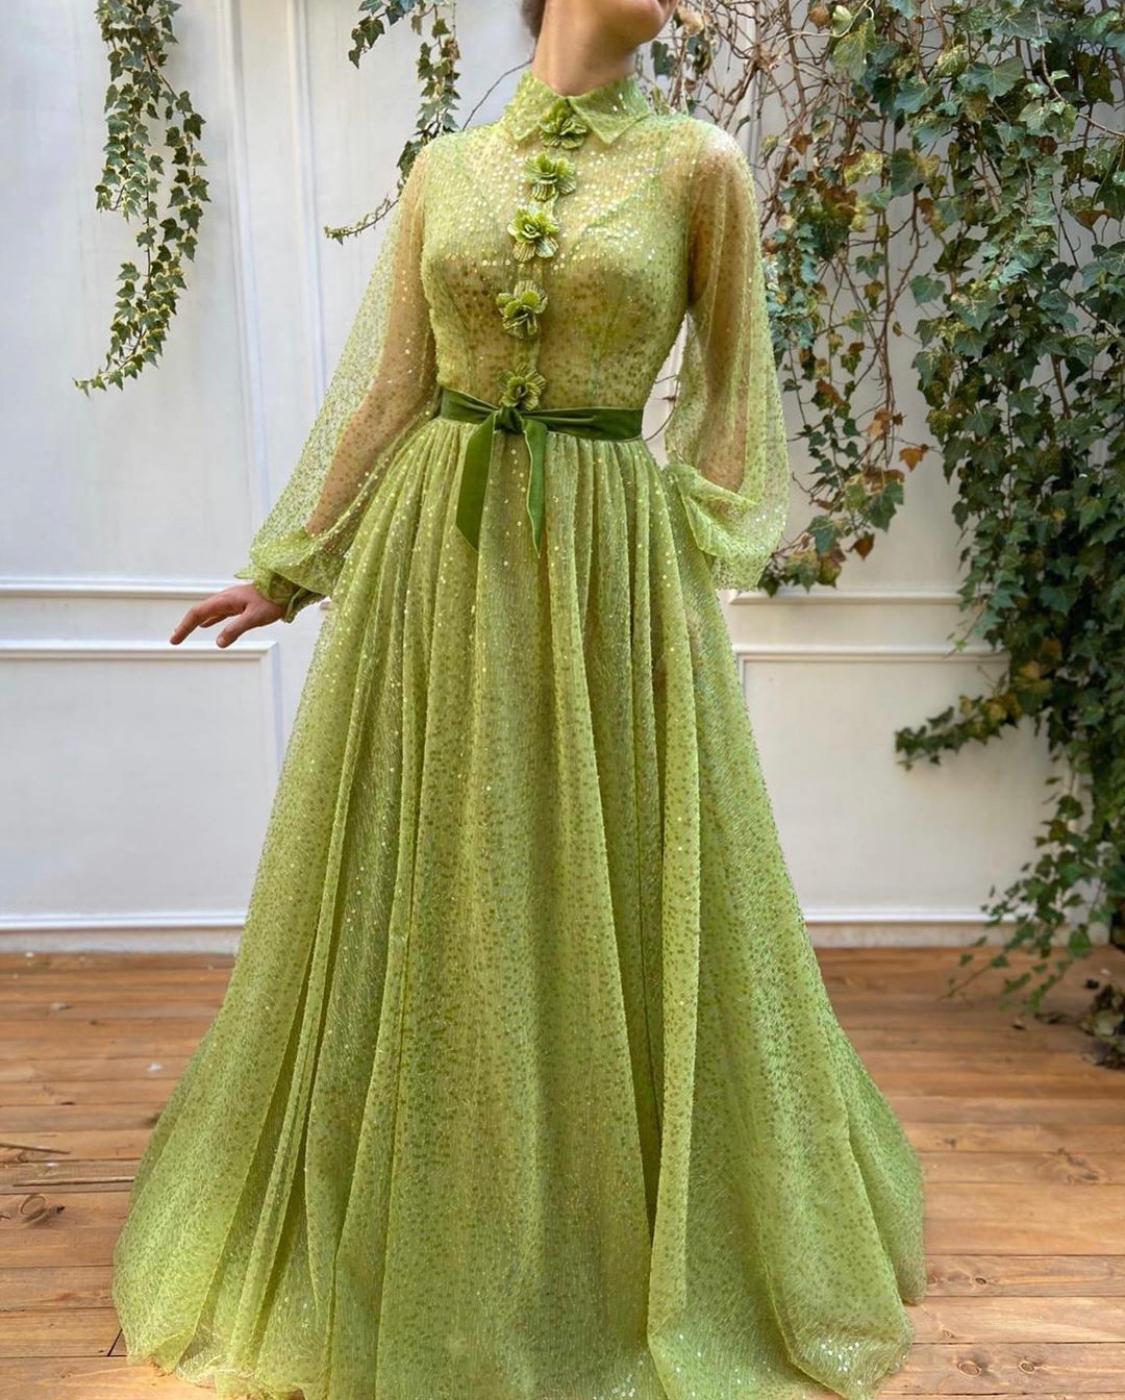 Green A-Line dress with sequins, embroidery and long sleeves